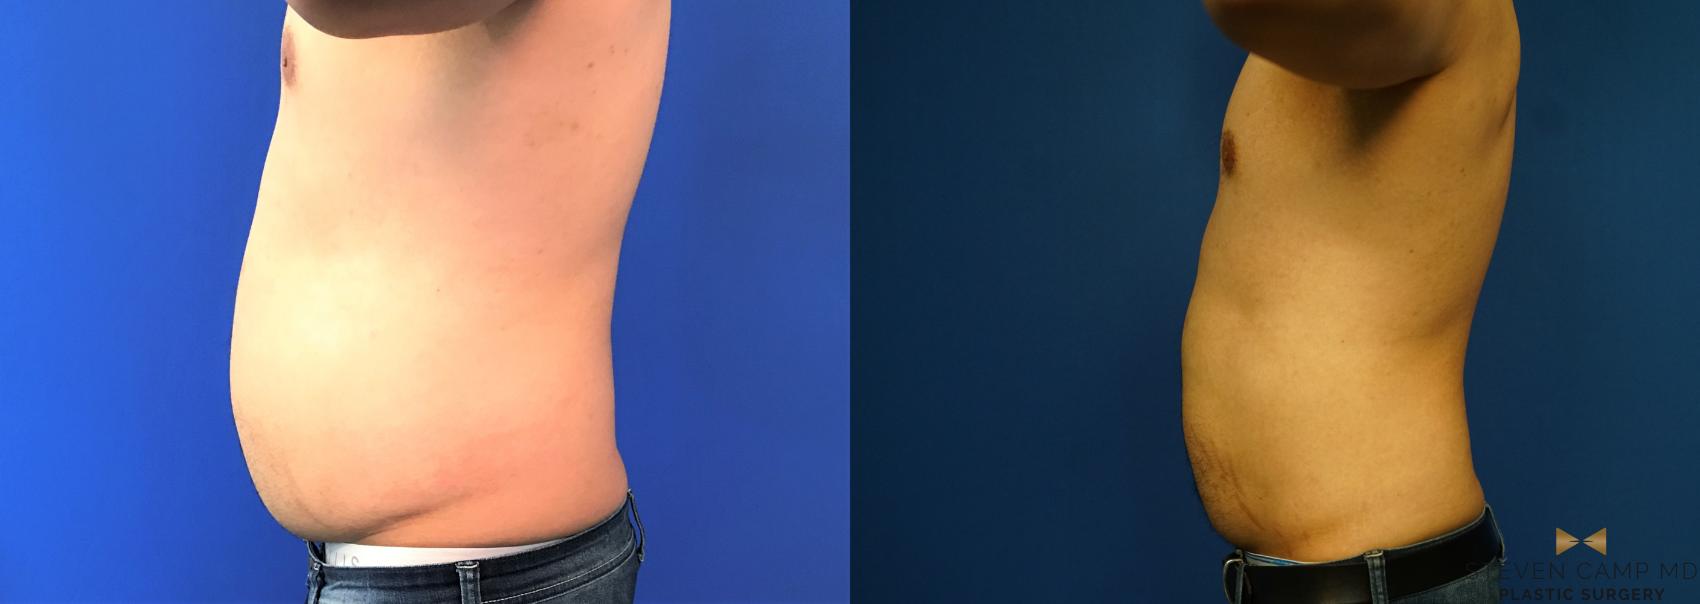 CoolSculpting Before & After Photo | Fort Worth, Texas | Steven Camp MD Plastic Surgery